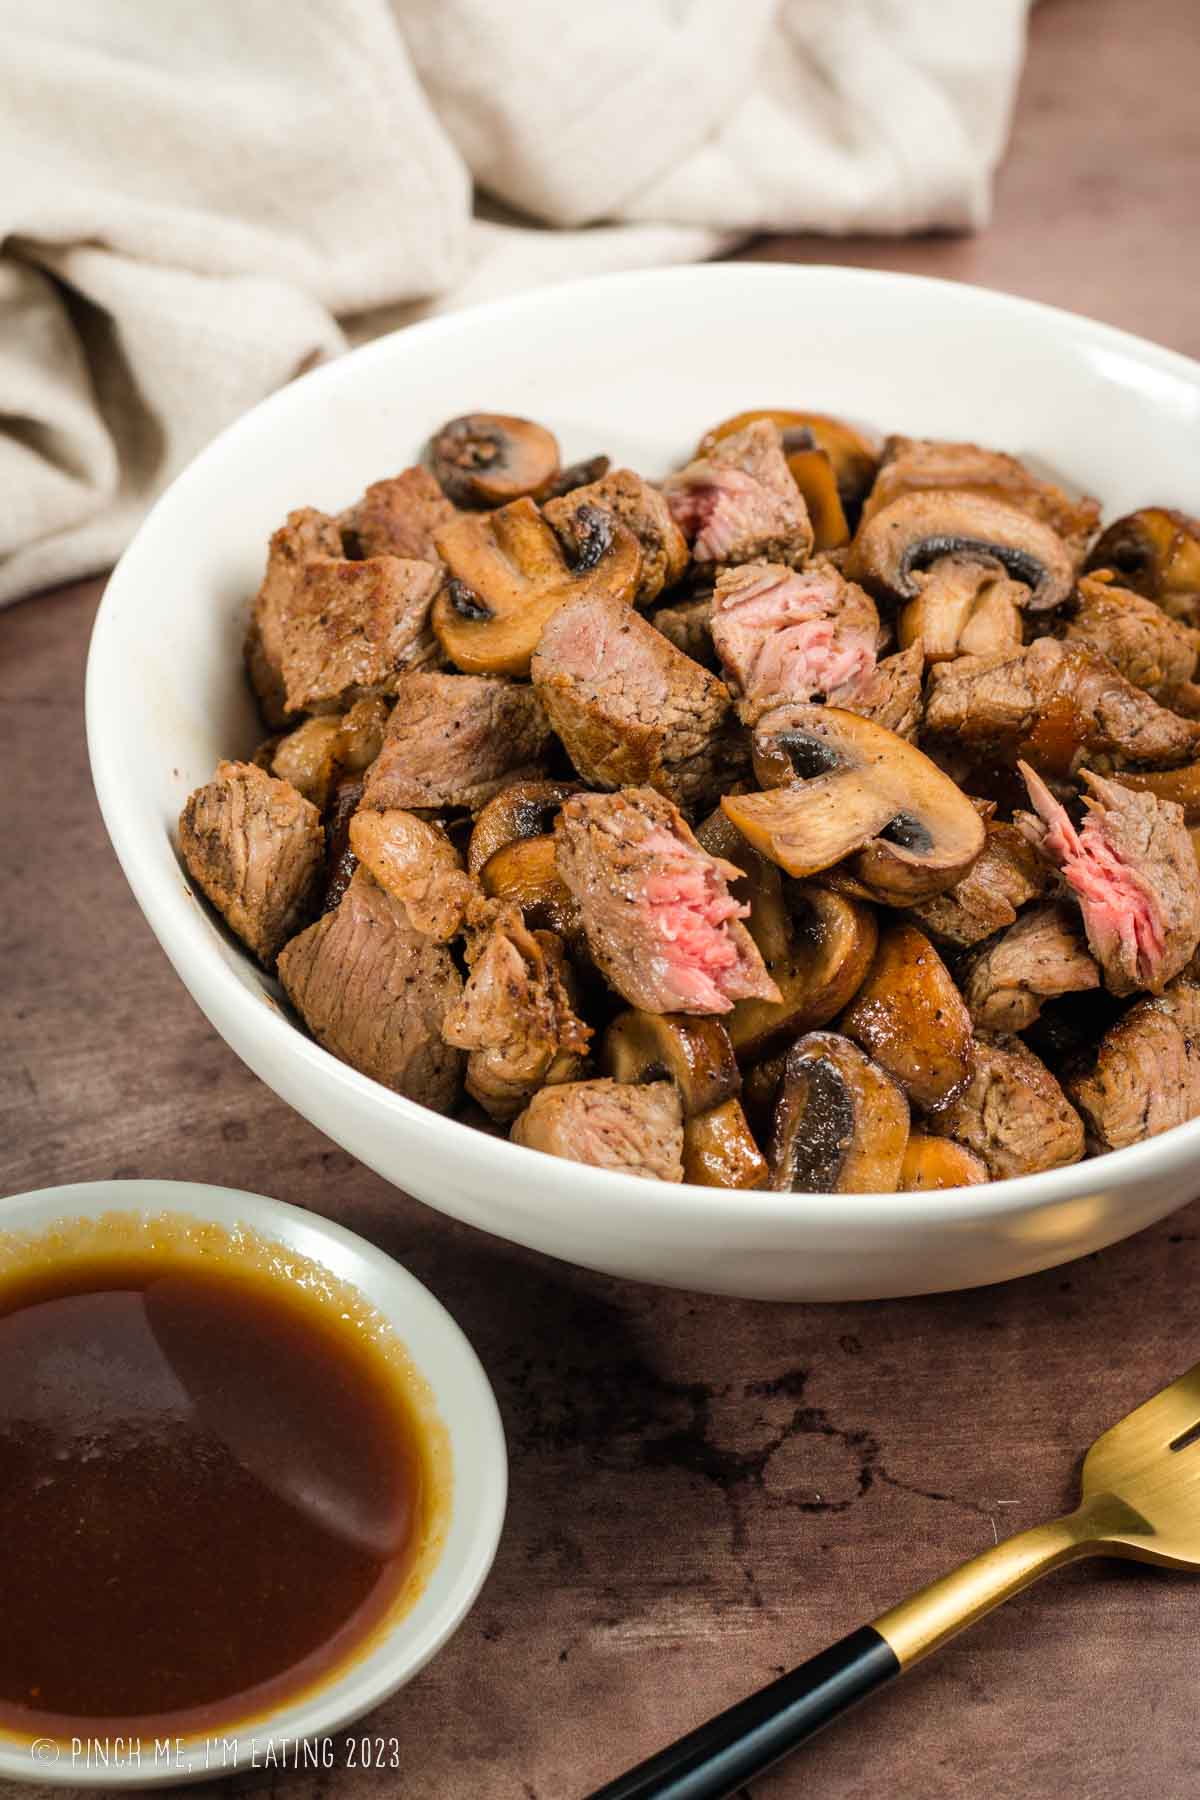 Hibachi steak and mushrooms in a white bowl with ginger dipping sauce.